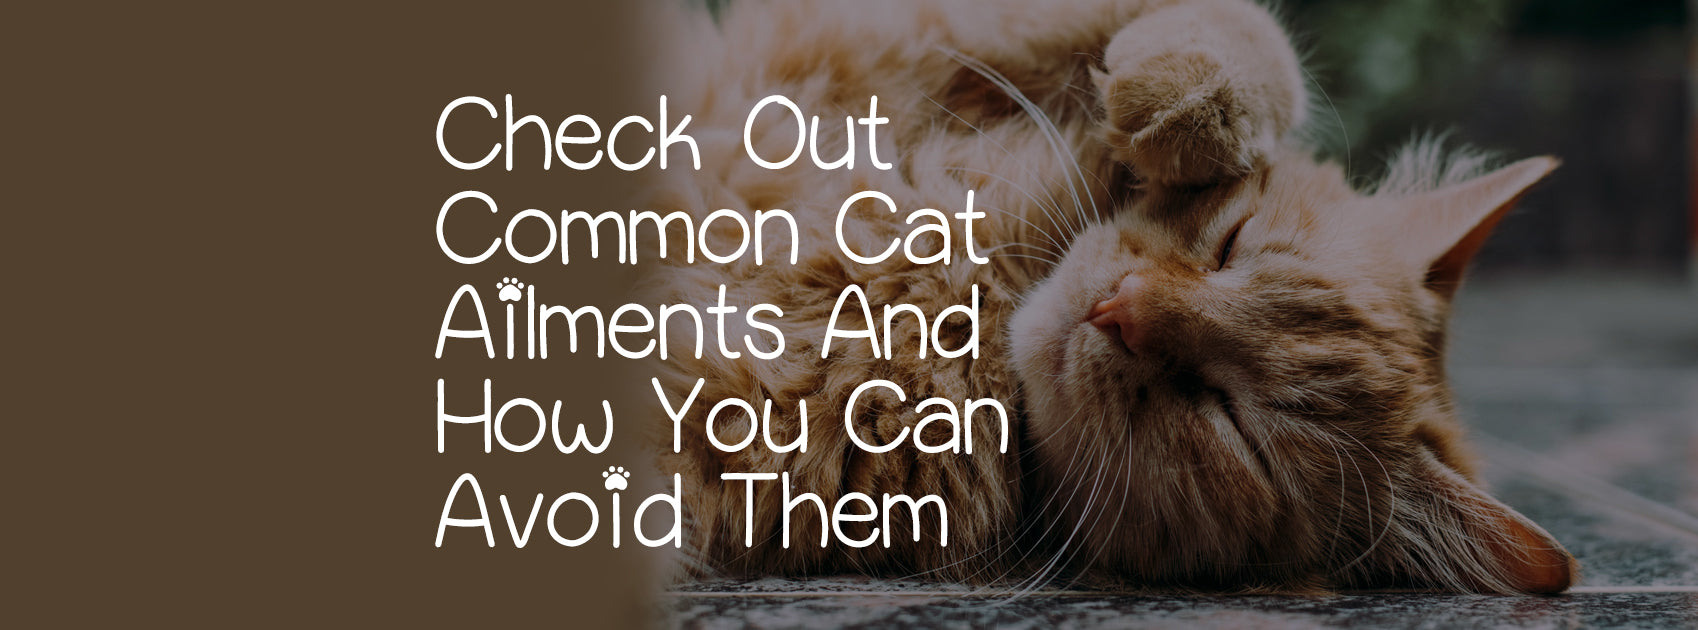 CHECK OUT COMMON CAT AILMENTS AND HOW YOU CAN AVOID THEM